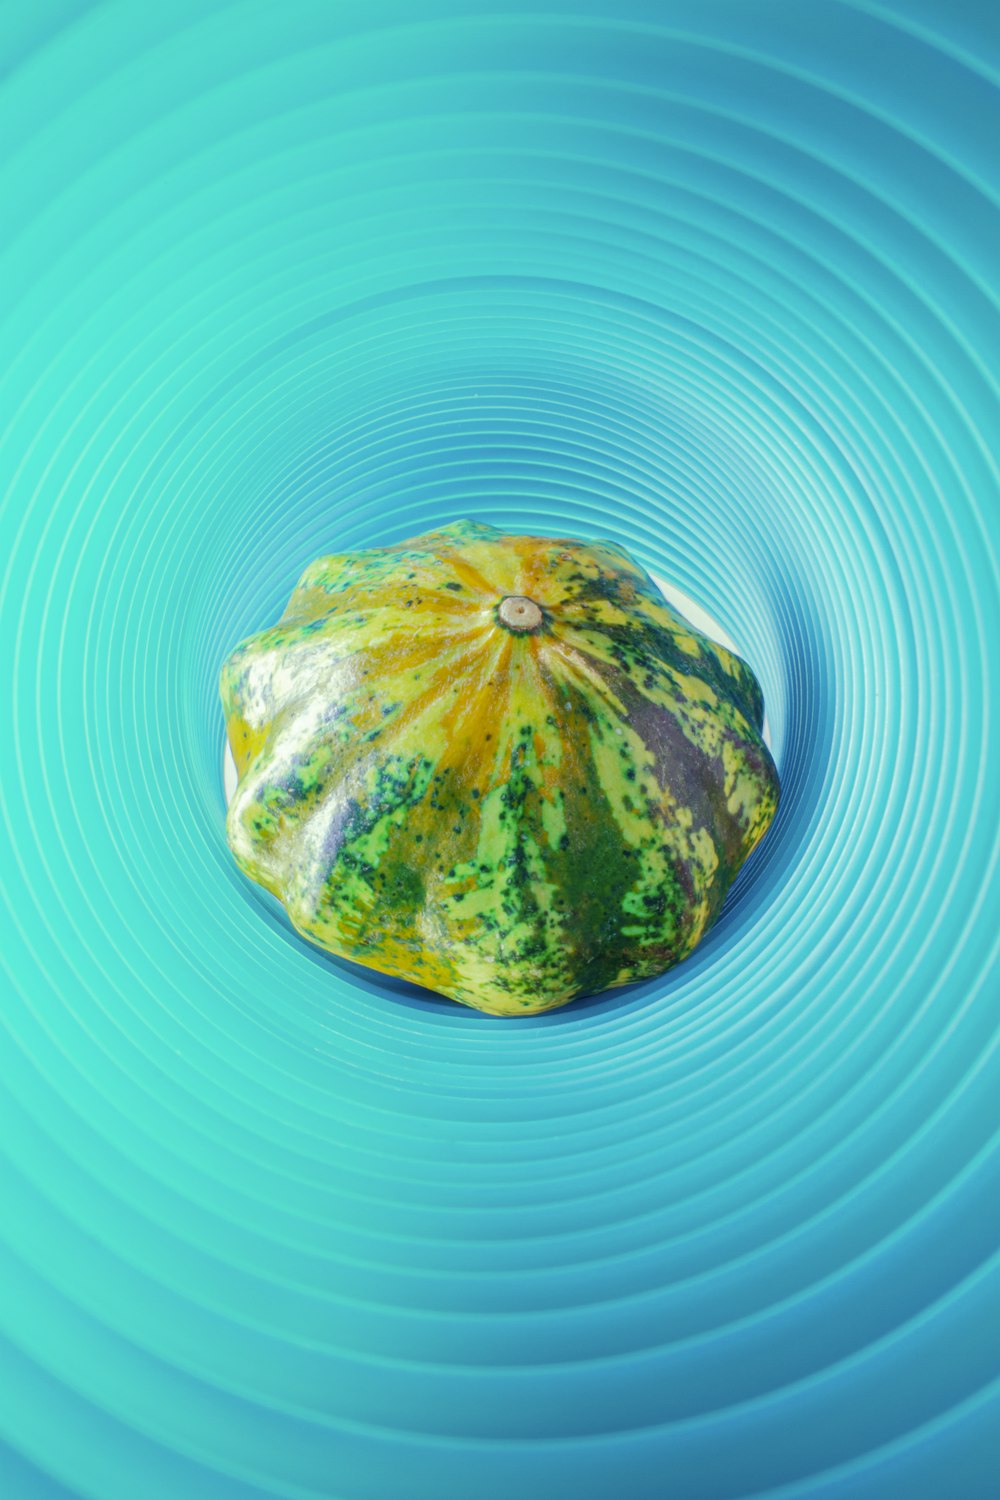 a watermelon in a blue bowl with ripples